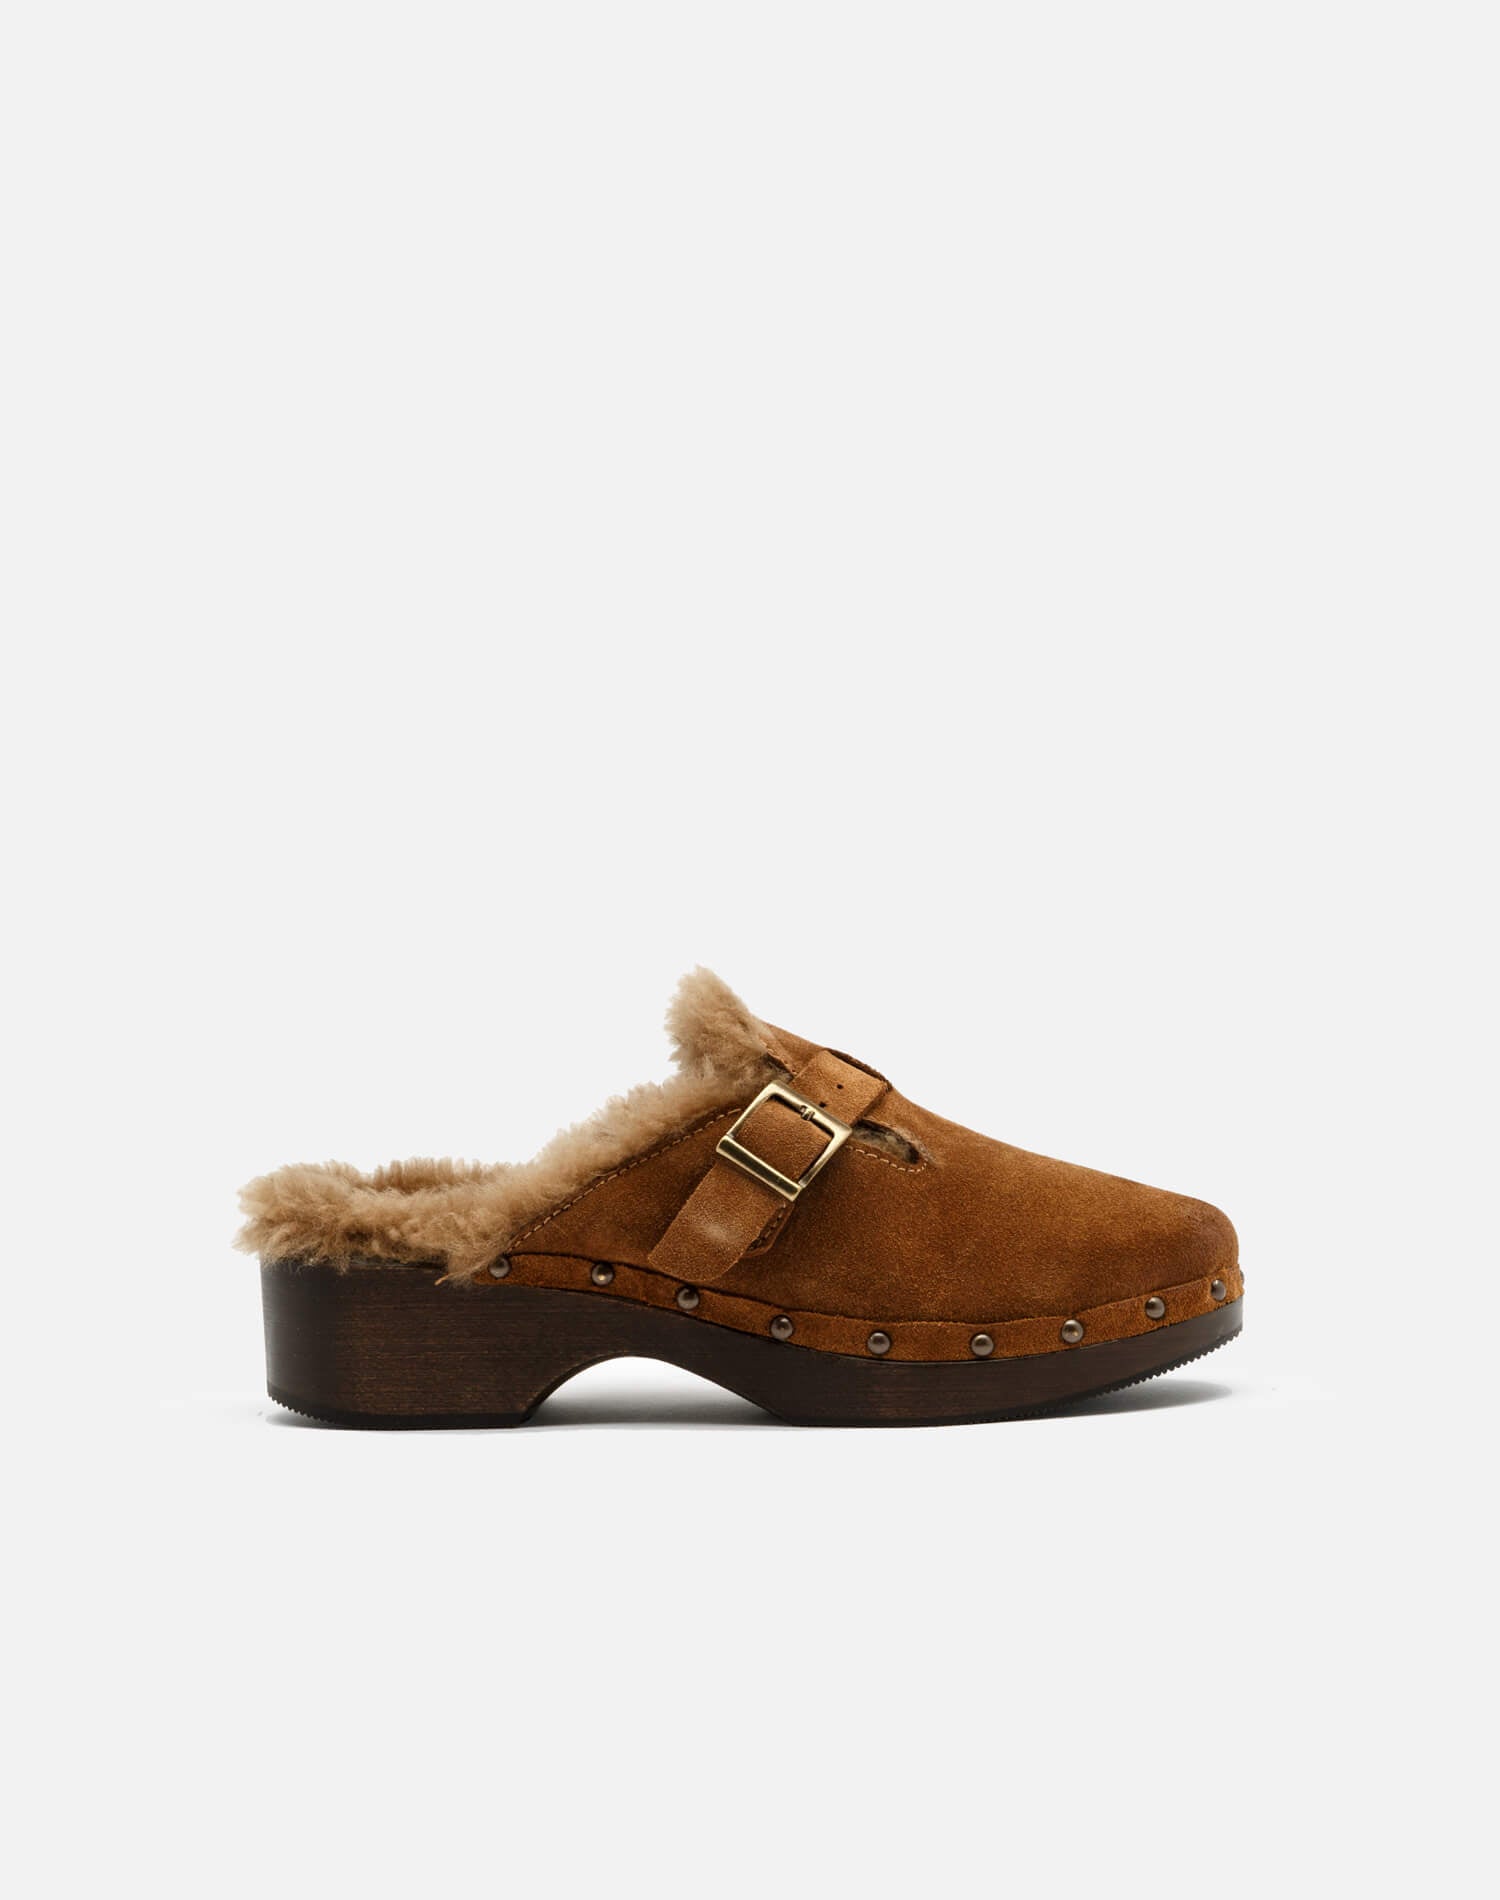 Re/Done | 70s Shearling Clog - Cognac Suede and Shearling | Footwear | Size 40